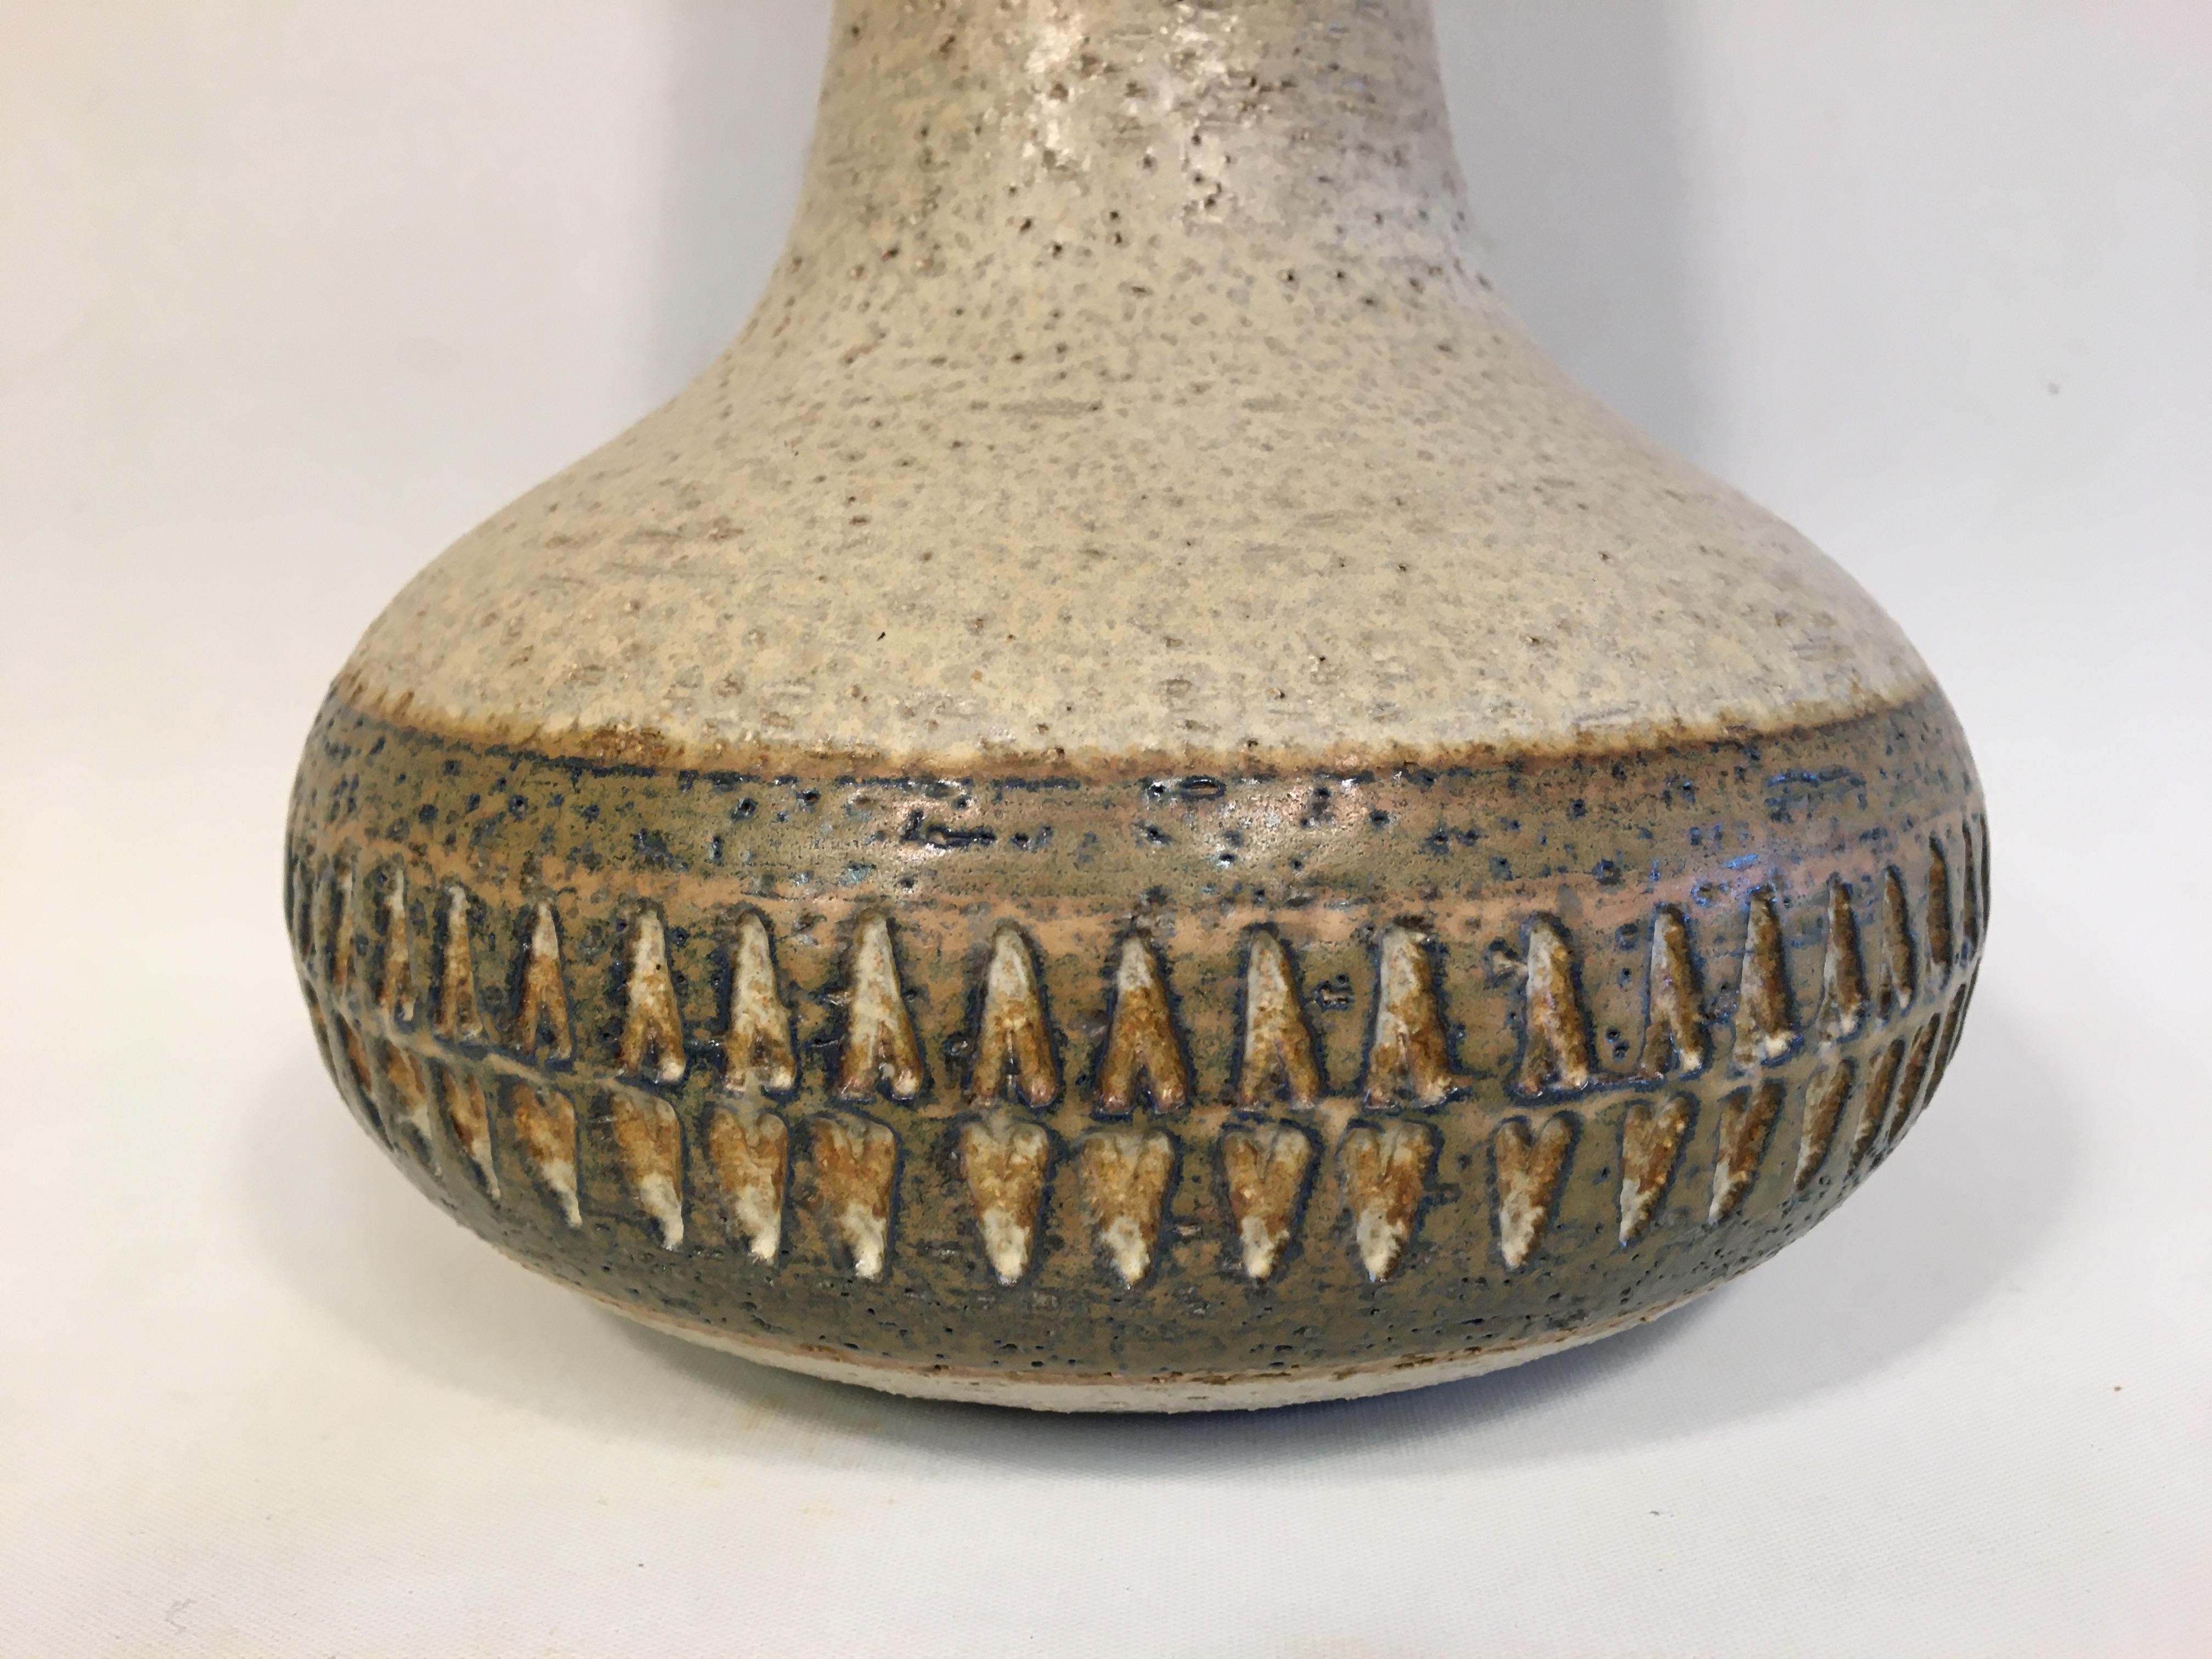 Ceramic table lamp from Søholm, Bornholm.
The lamp is with sand colored glaze, and gray-green patterned glaze at the widest point at the bottom of the lamp.
Measures: Height to the socket 32 cm, Ø 18 cm.